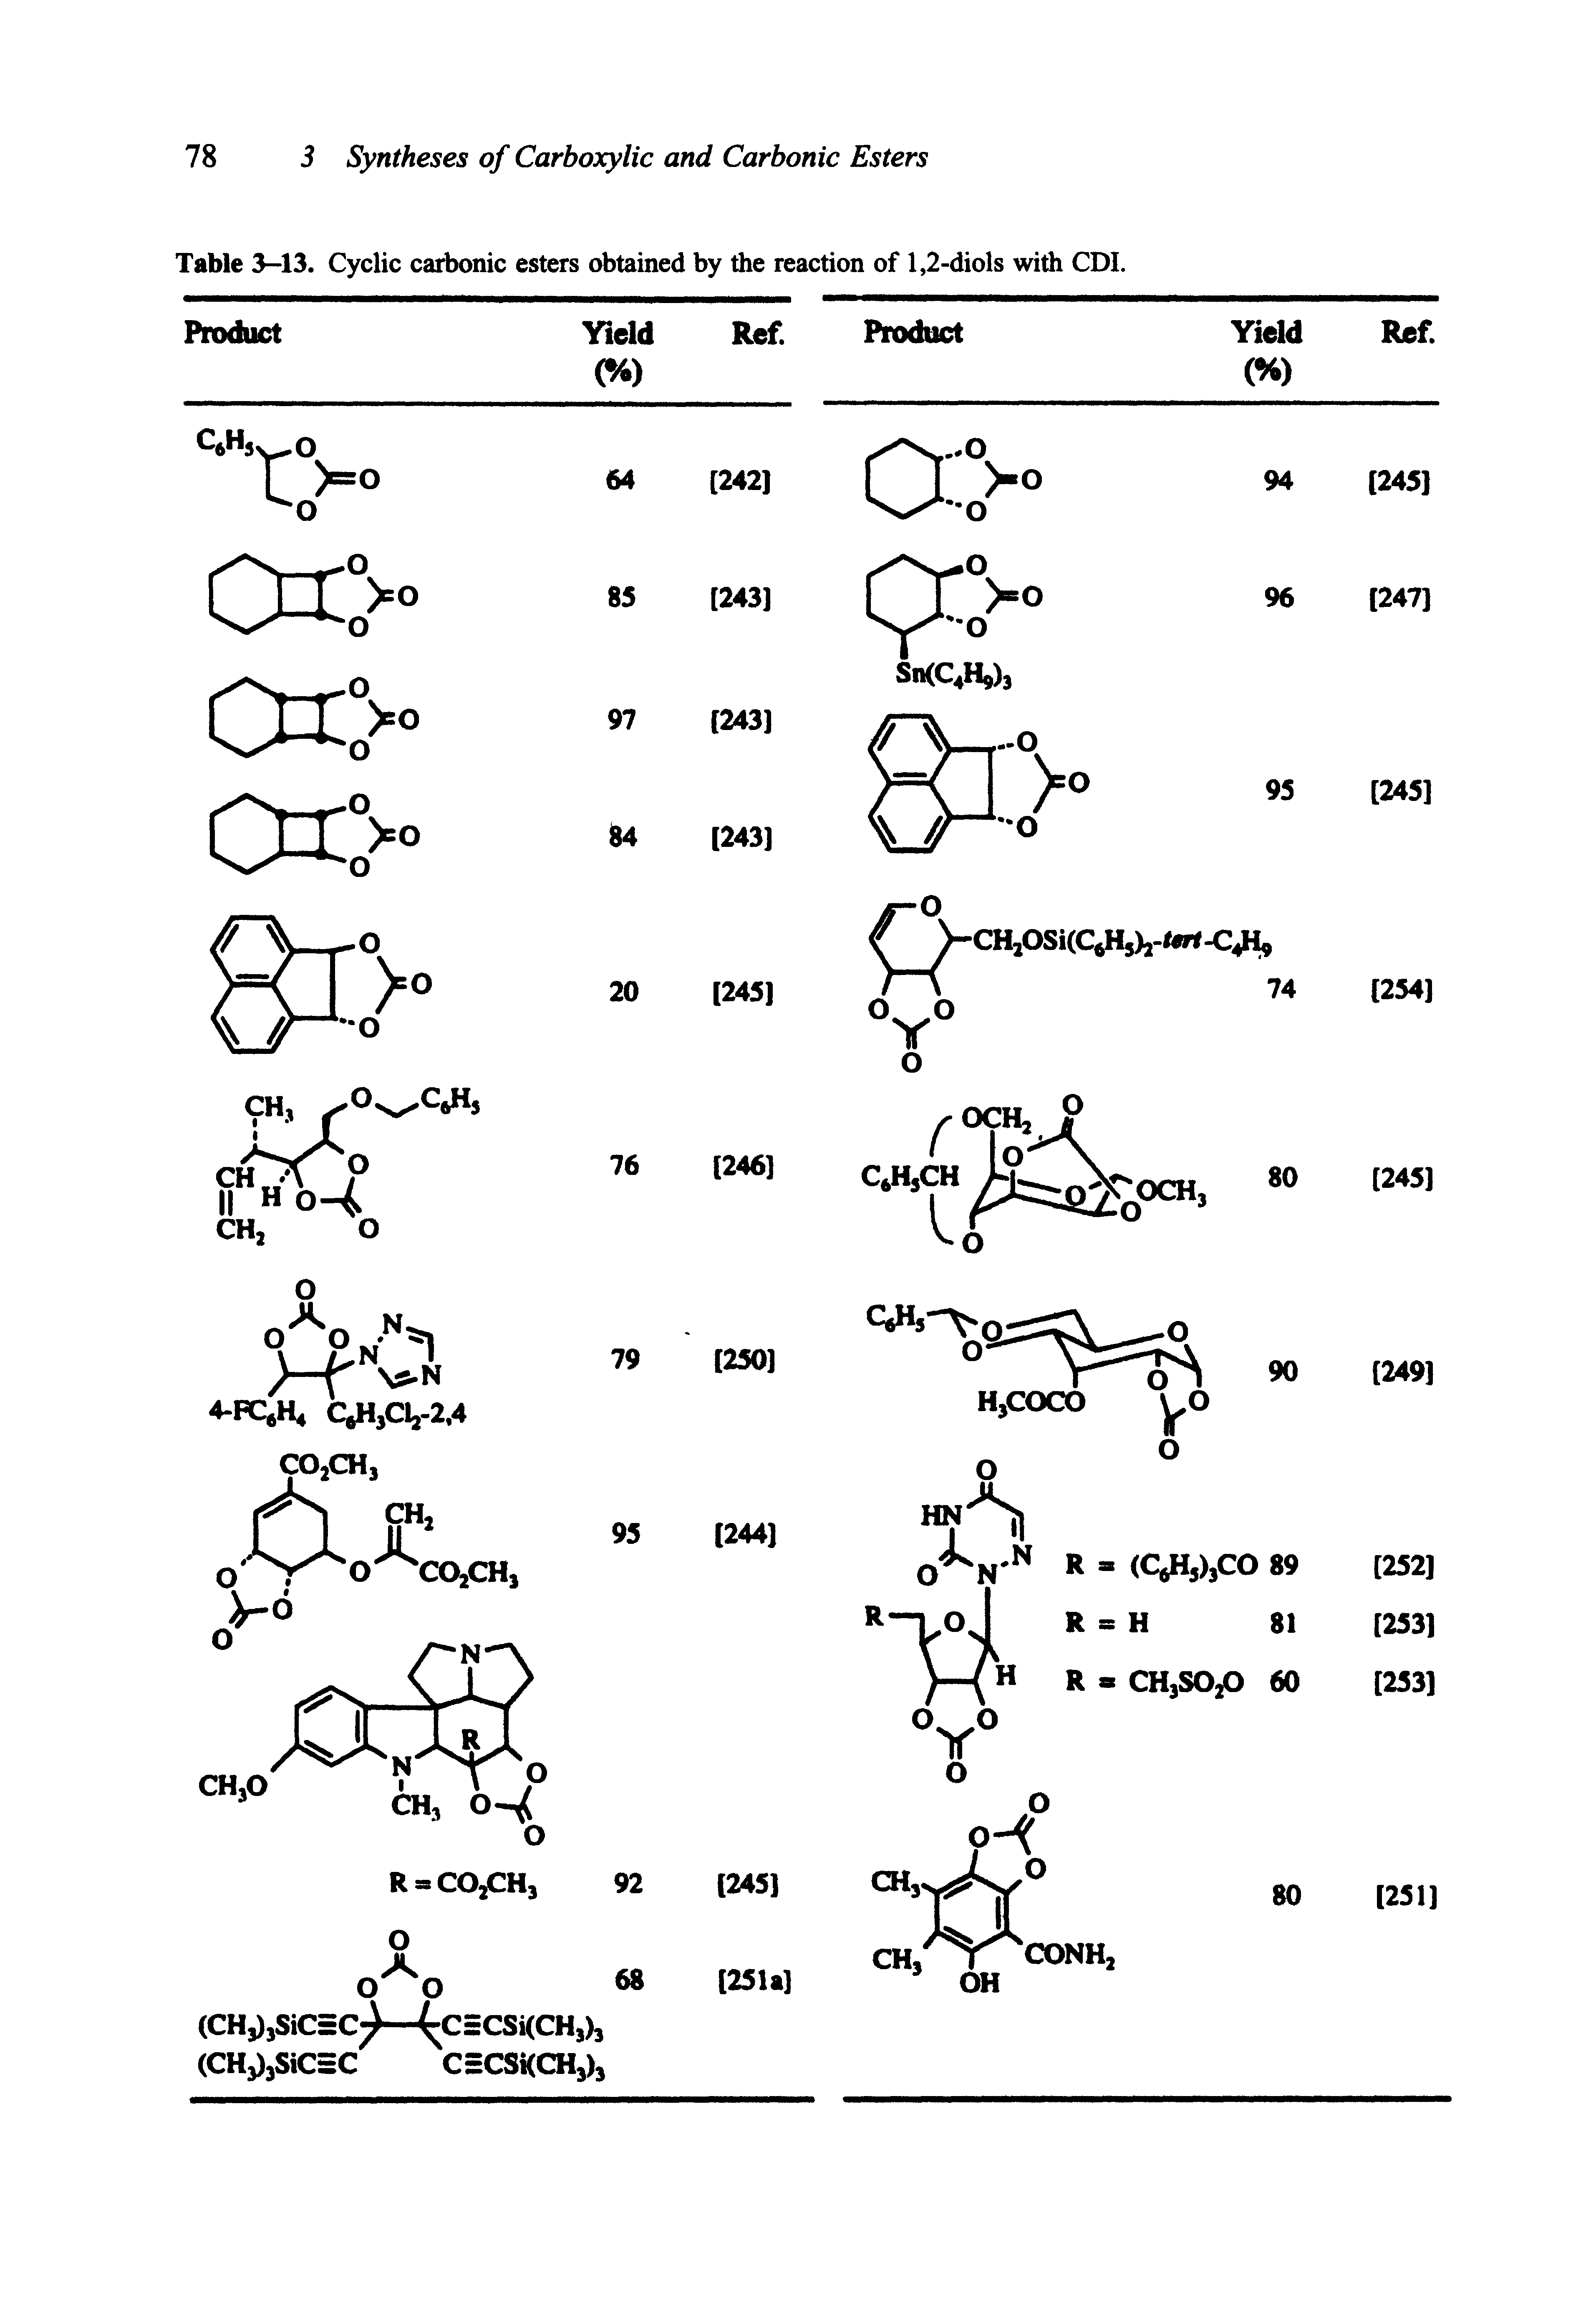 Table 3-13. Cyclic carbonic esters obtained by the reaction of 1,2-diols with CDI.